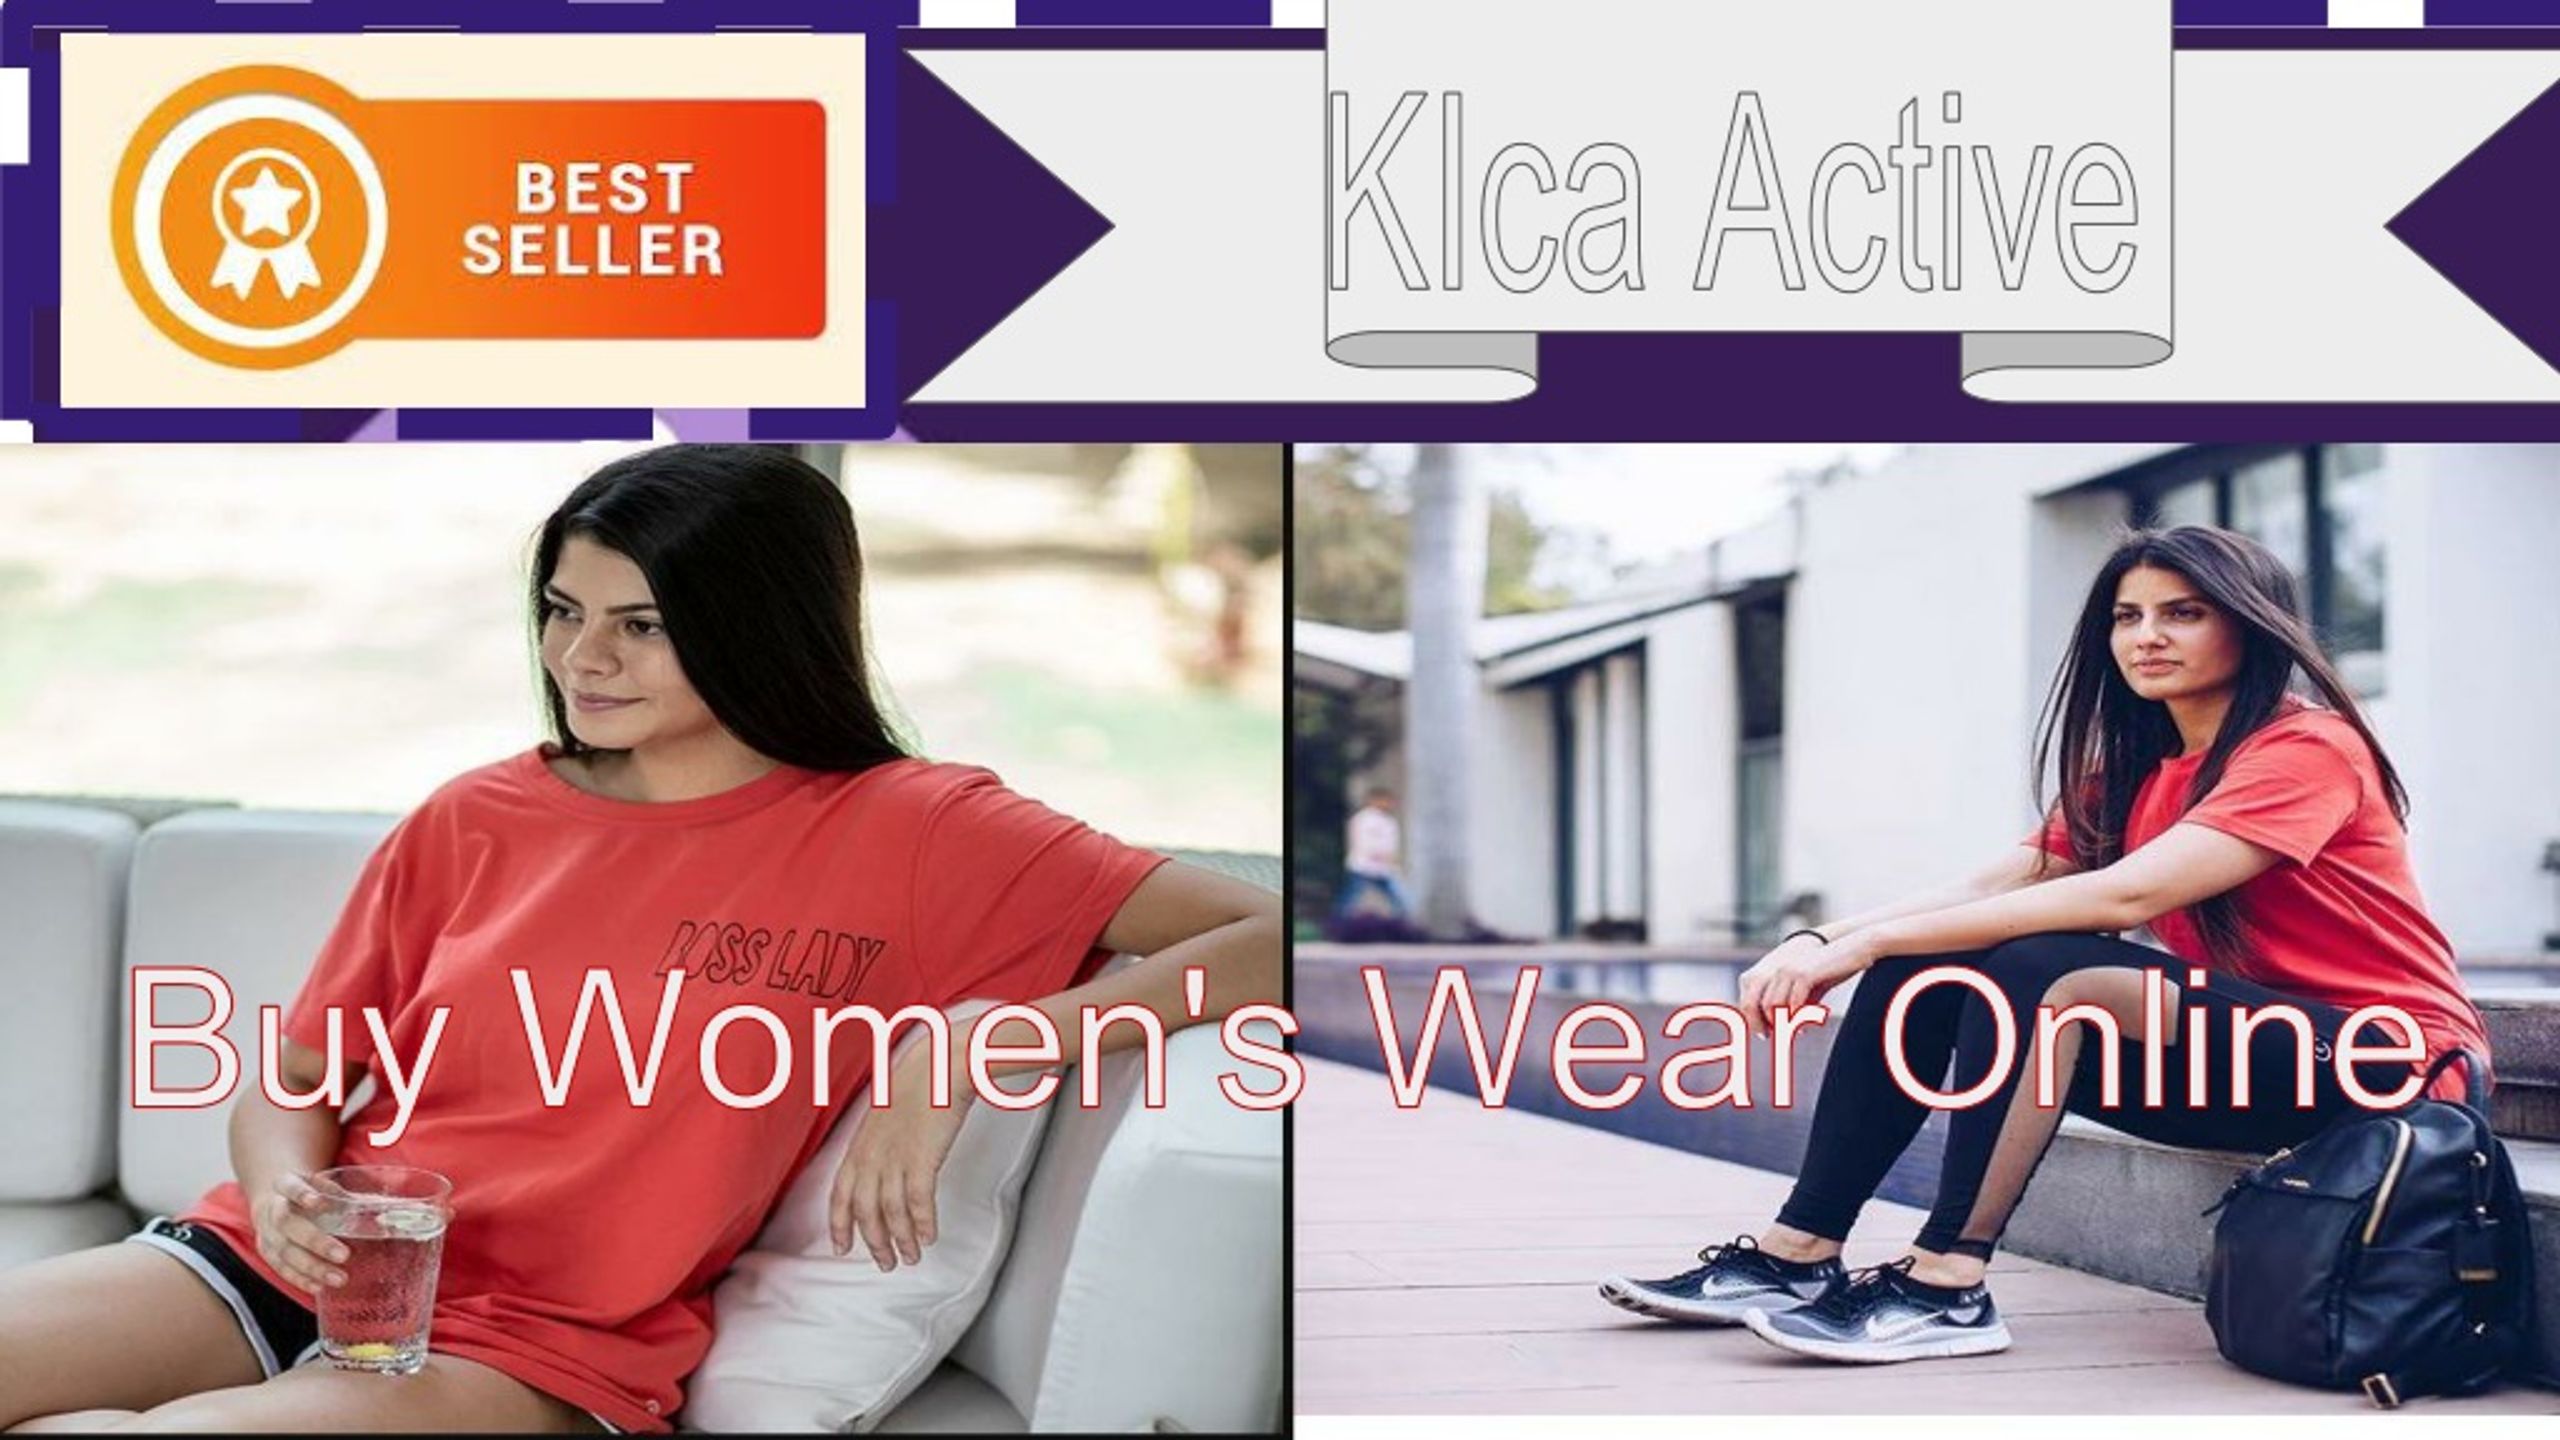 PPT - Workout Clothes For Women At Kica Active : Women's